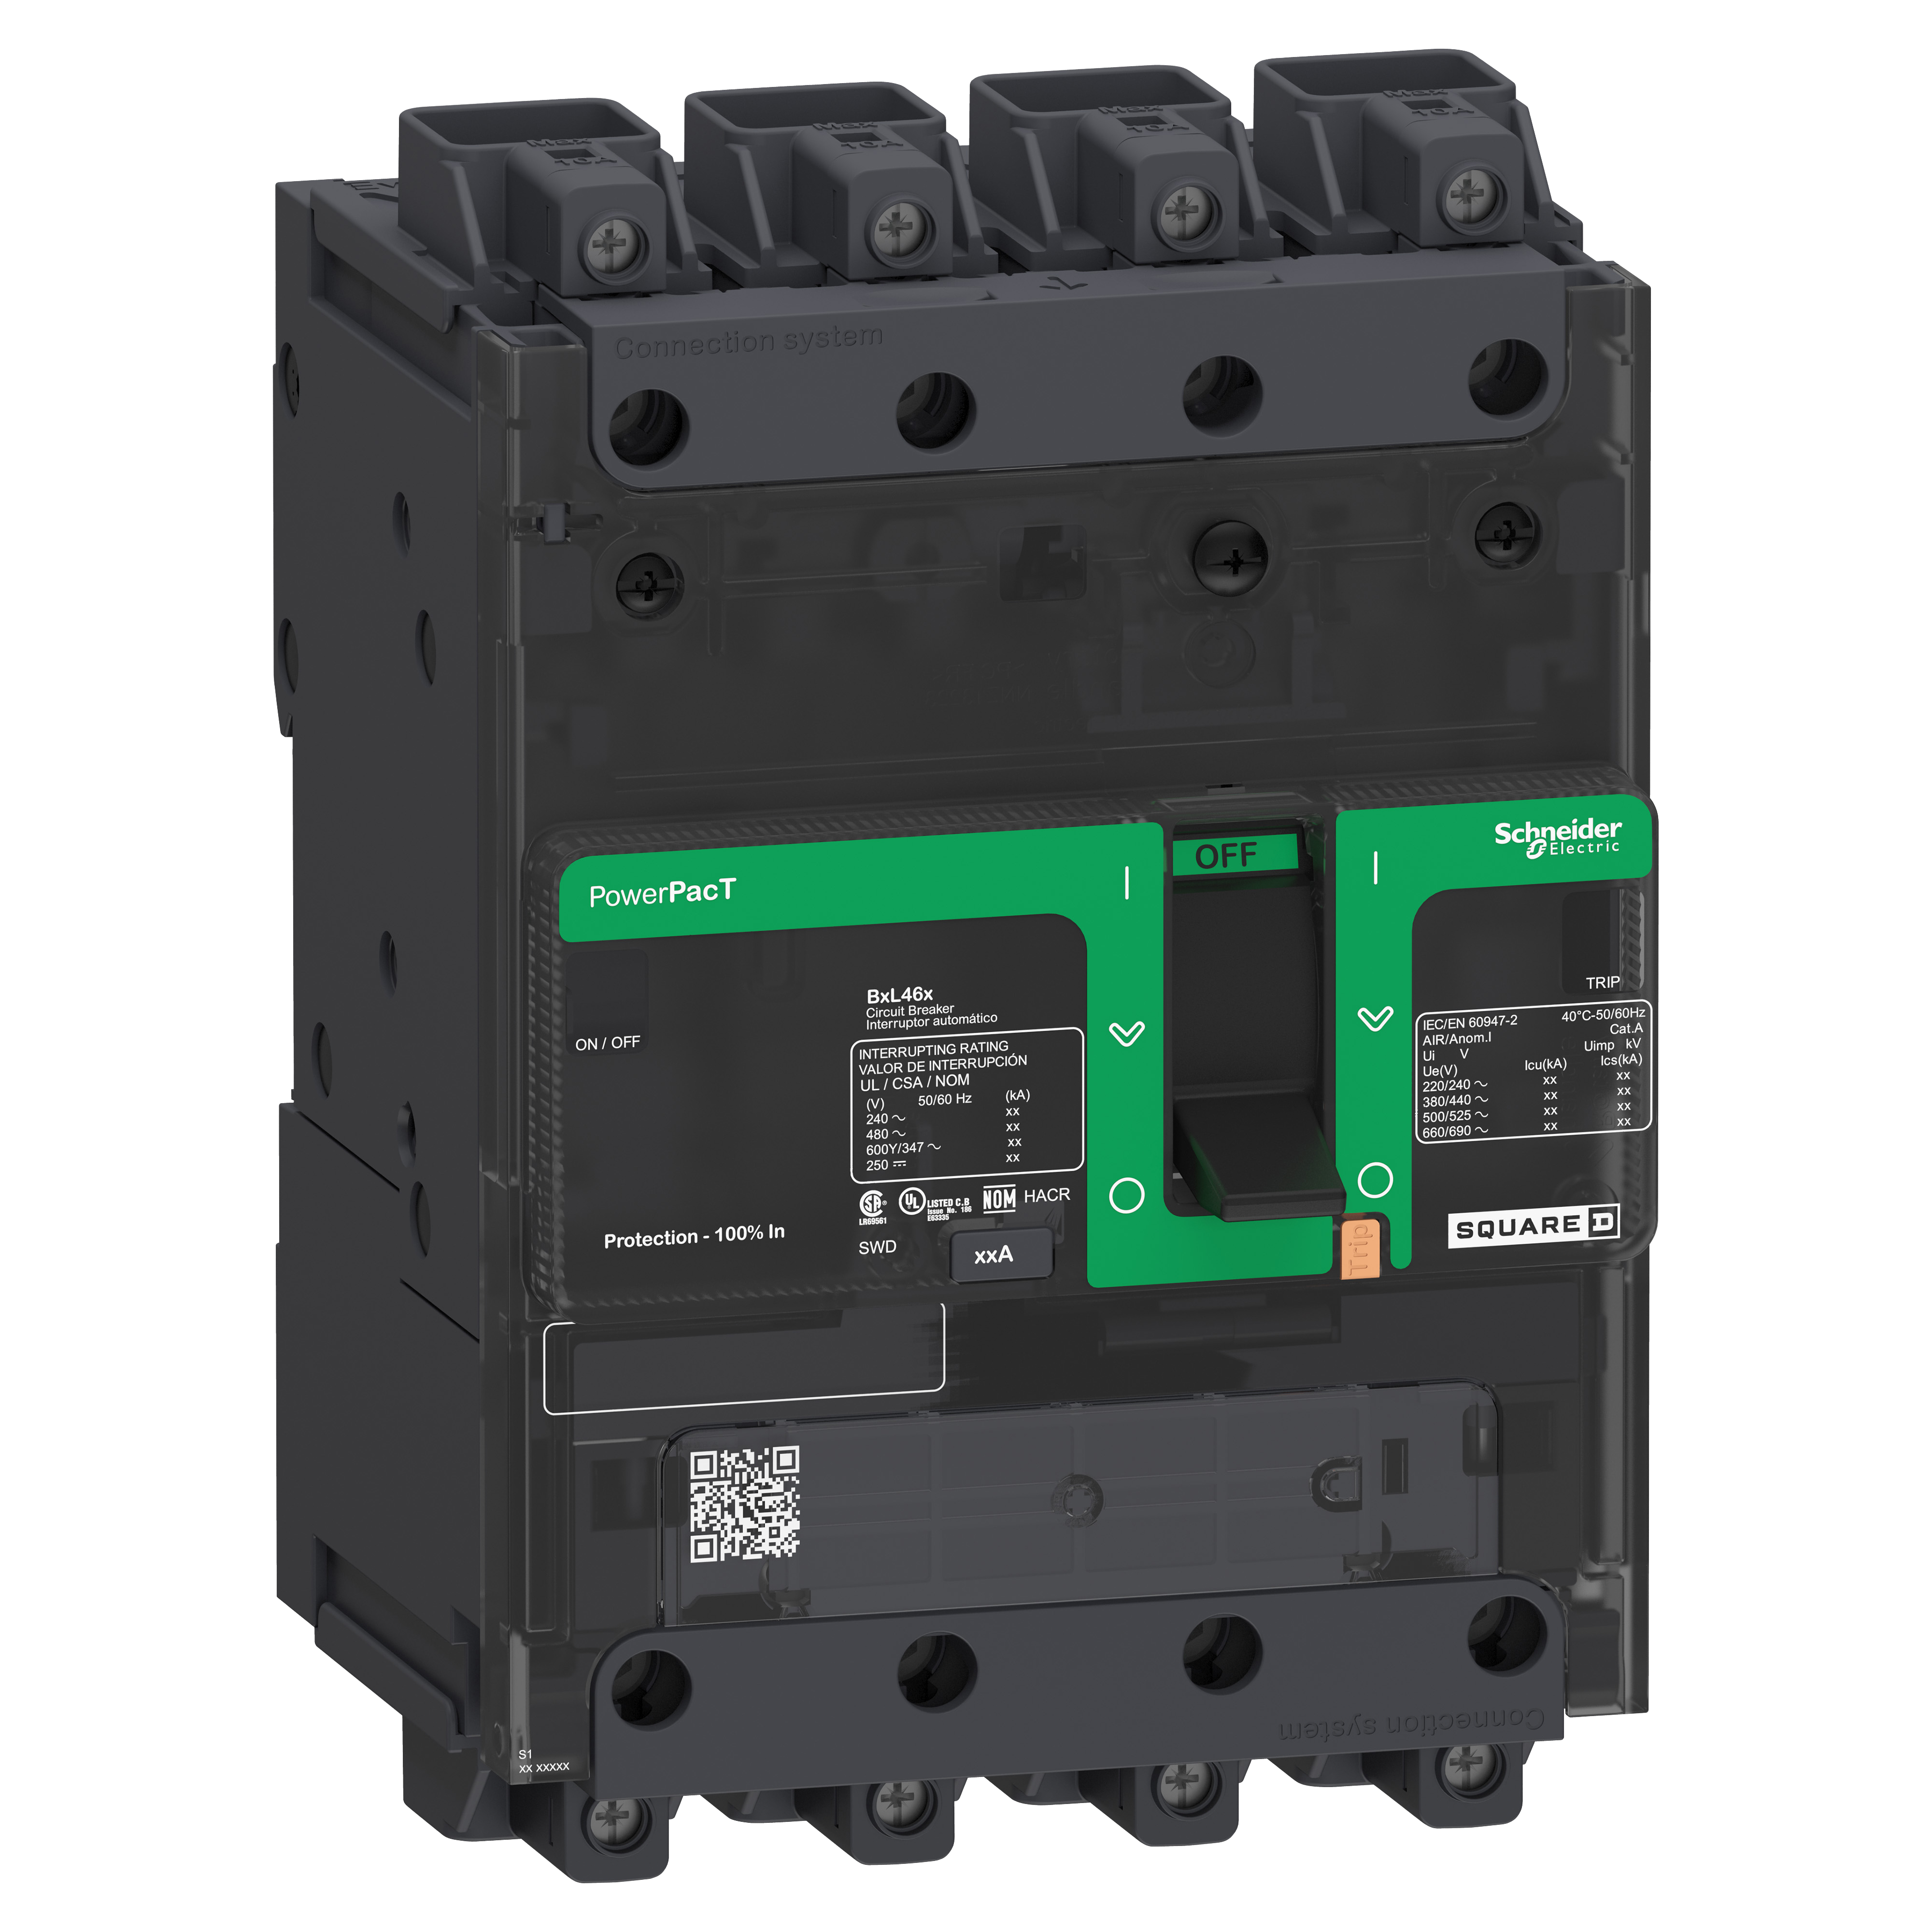 Circuit breaker, PowerPacT B, 80A, 4 pole, 600Y/347VAC, 18kA, lugs, thermal magnetic, 80%, control wire ON end